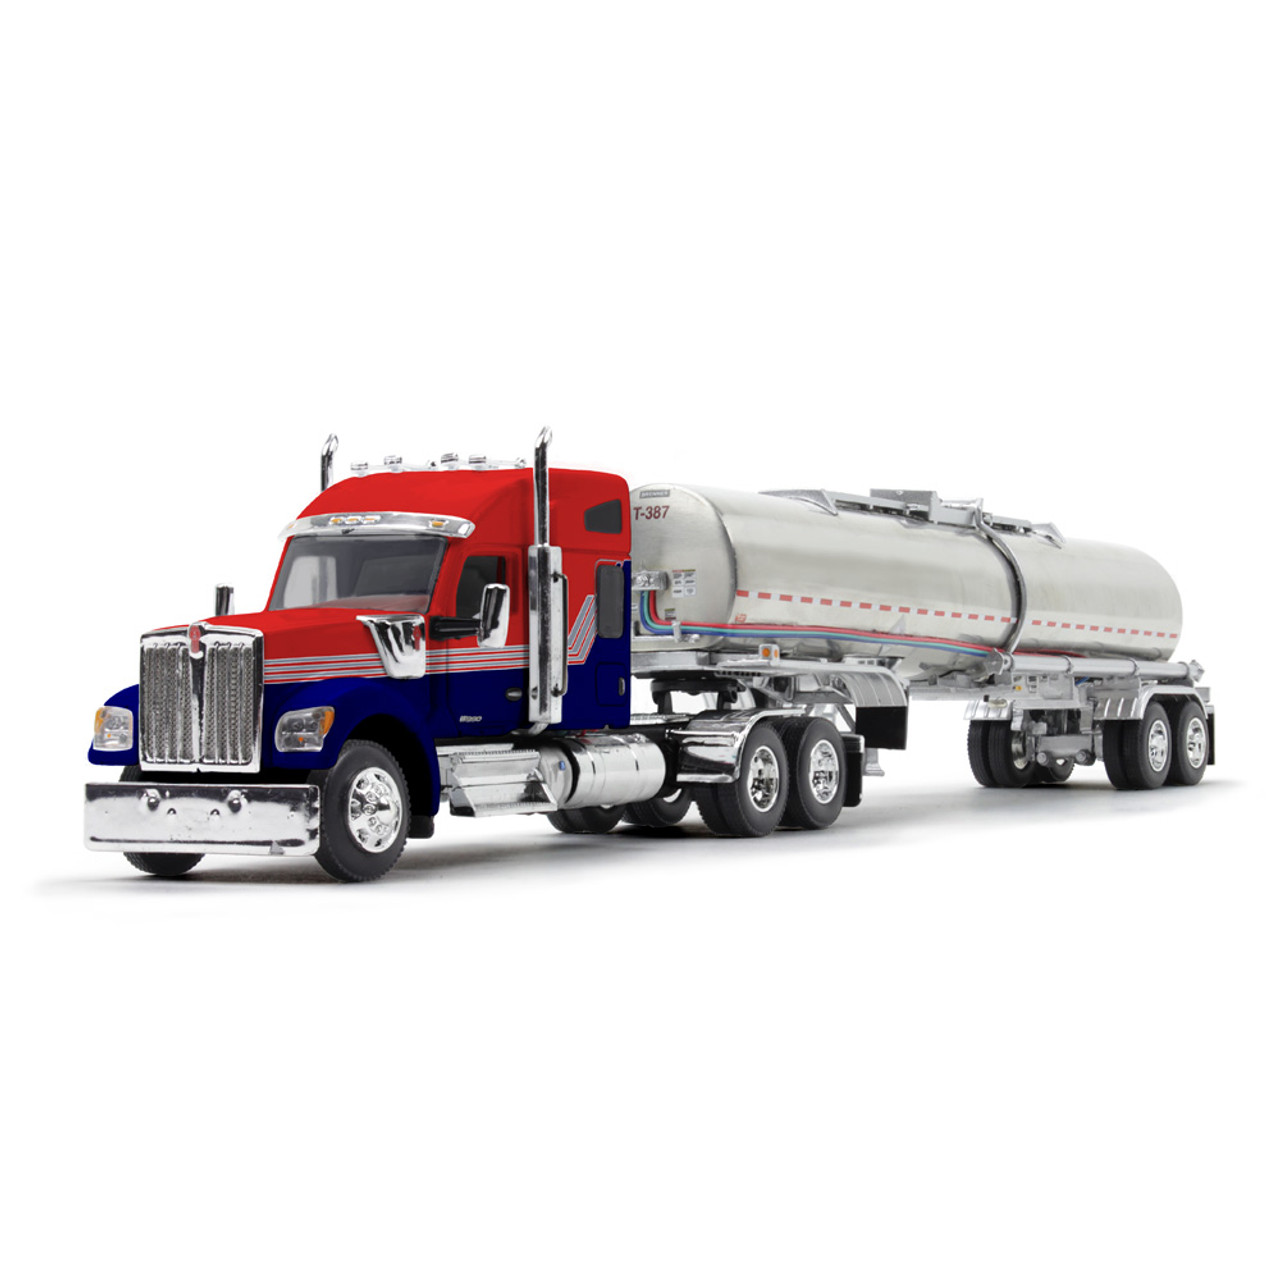 Pre-Order, Deposit only - 60-1731: Red/Navy Blue Kenworth® W990 with 76” Mid-Roof Sleeper & Brenner® Chemical Tank Trailer